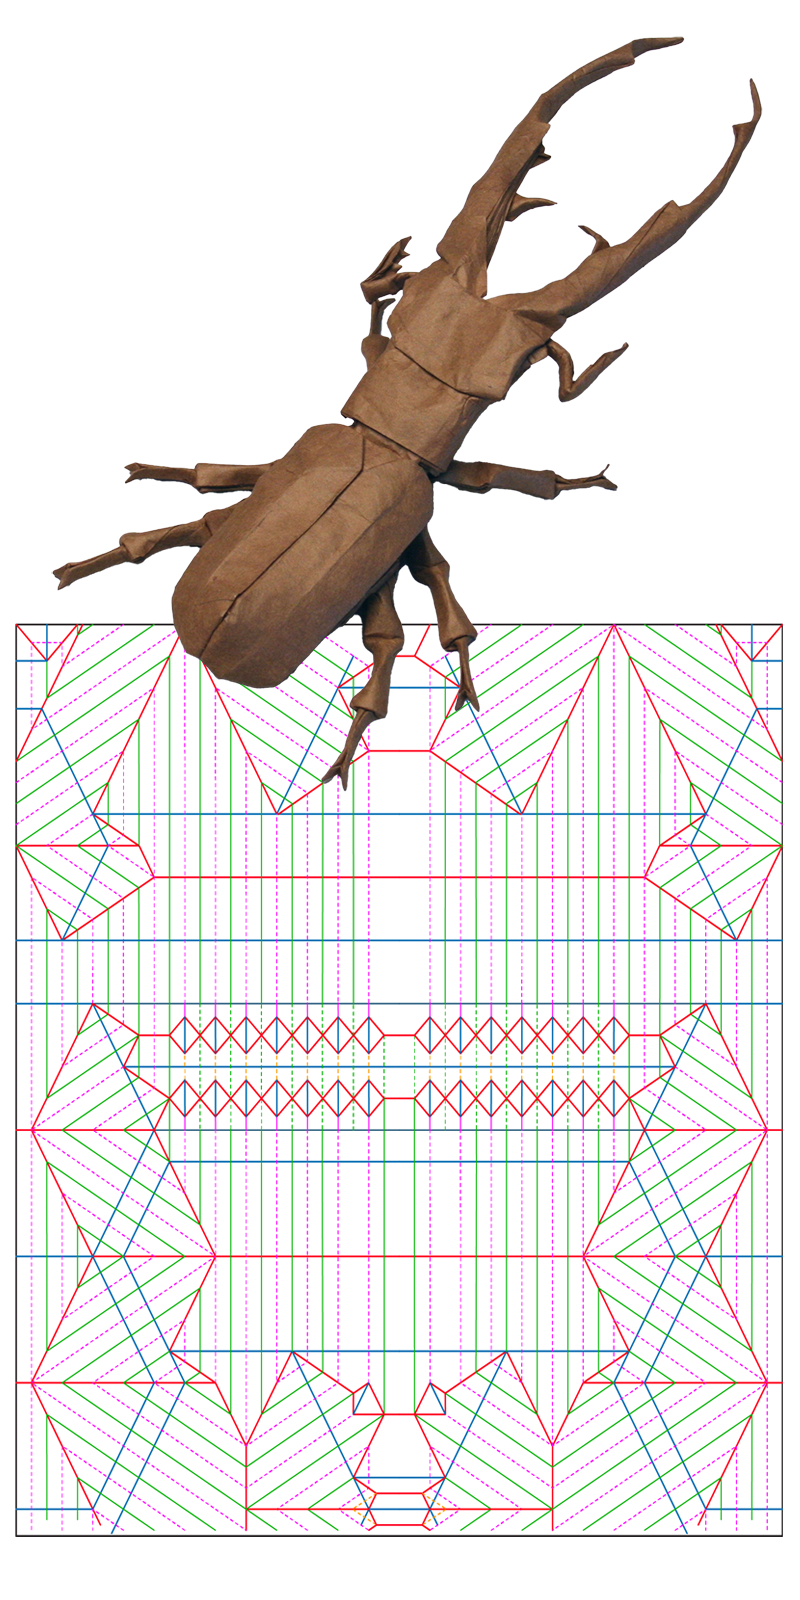 A stag beetle Lang created, along with the mathematically derived folding pattern to build it